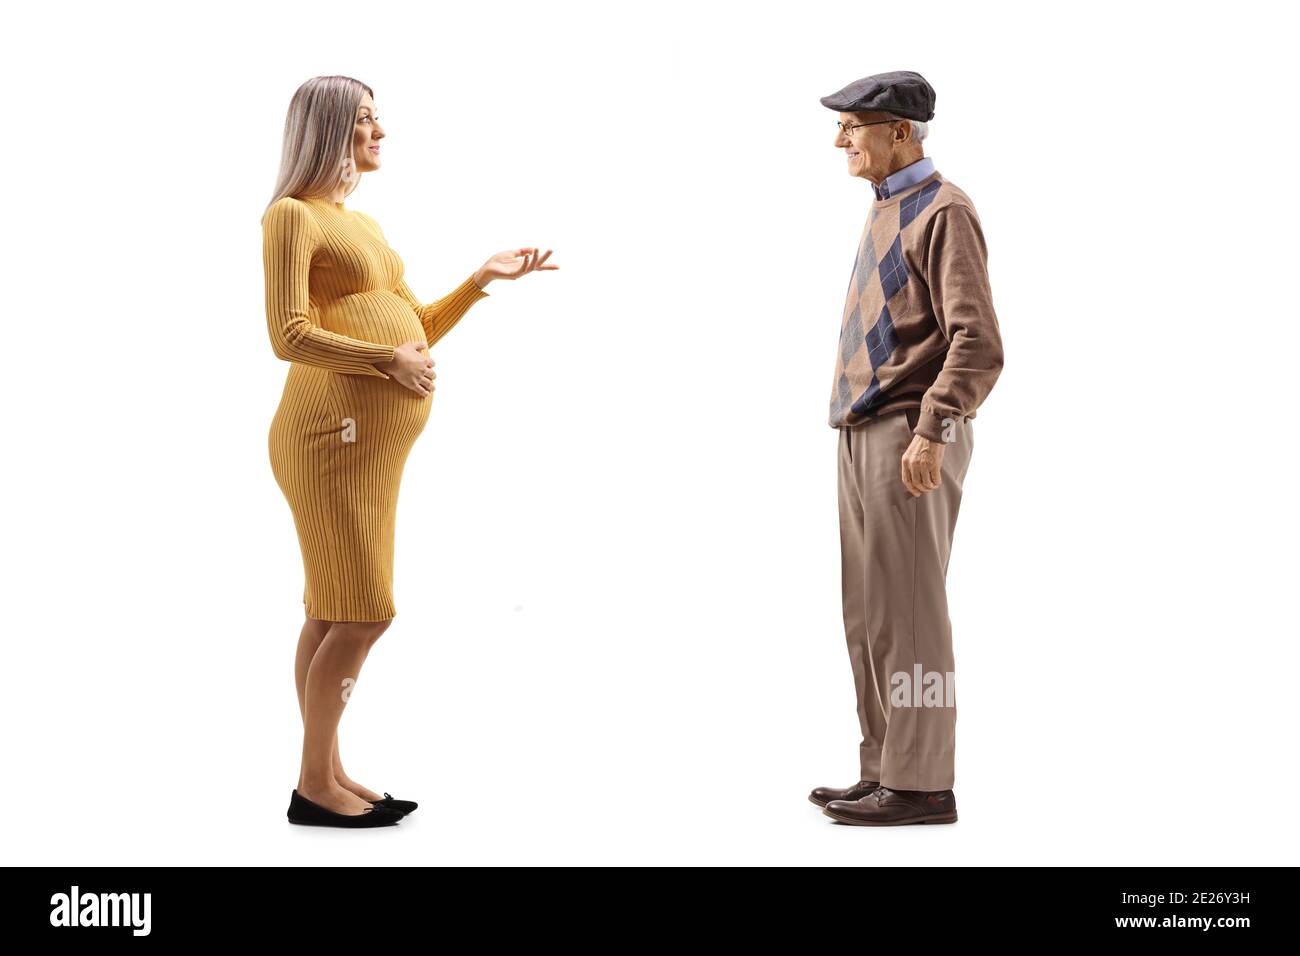 Full length profile shot of a pregnant woman talking to an elderly gentleman isolated on white background Stock Photo